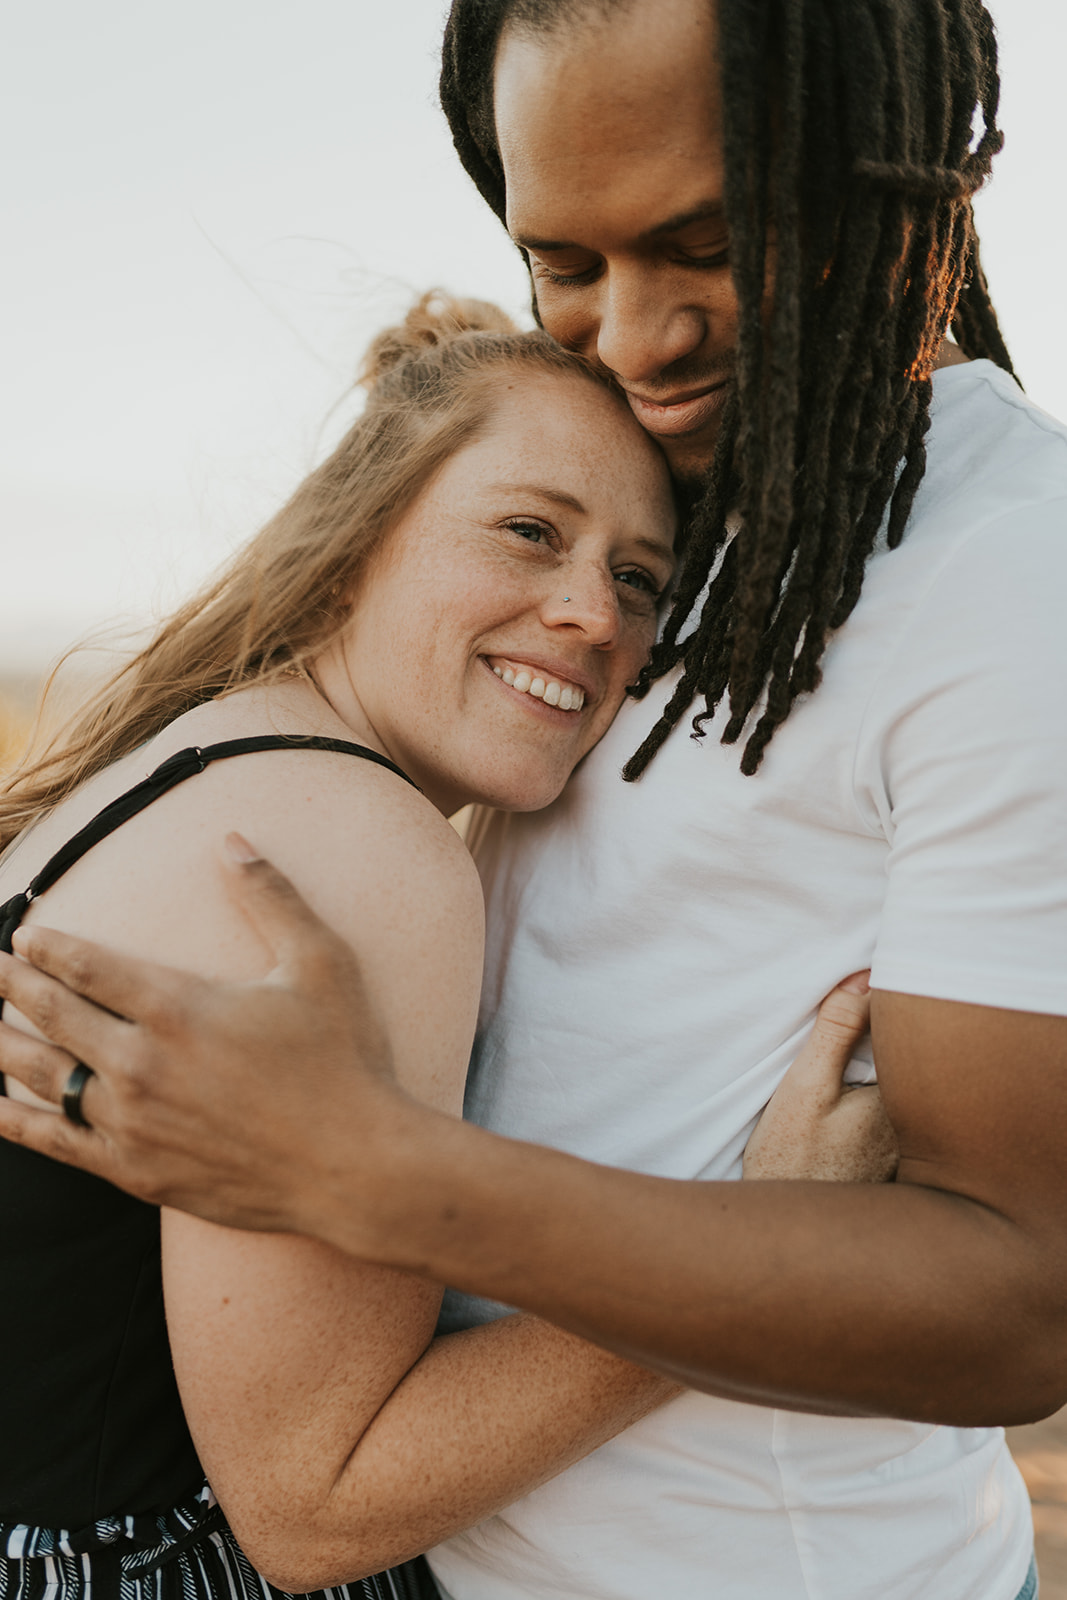 Smiling Couple in Engagement Photo